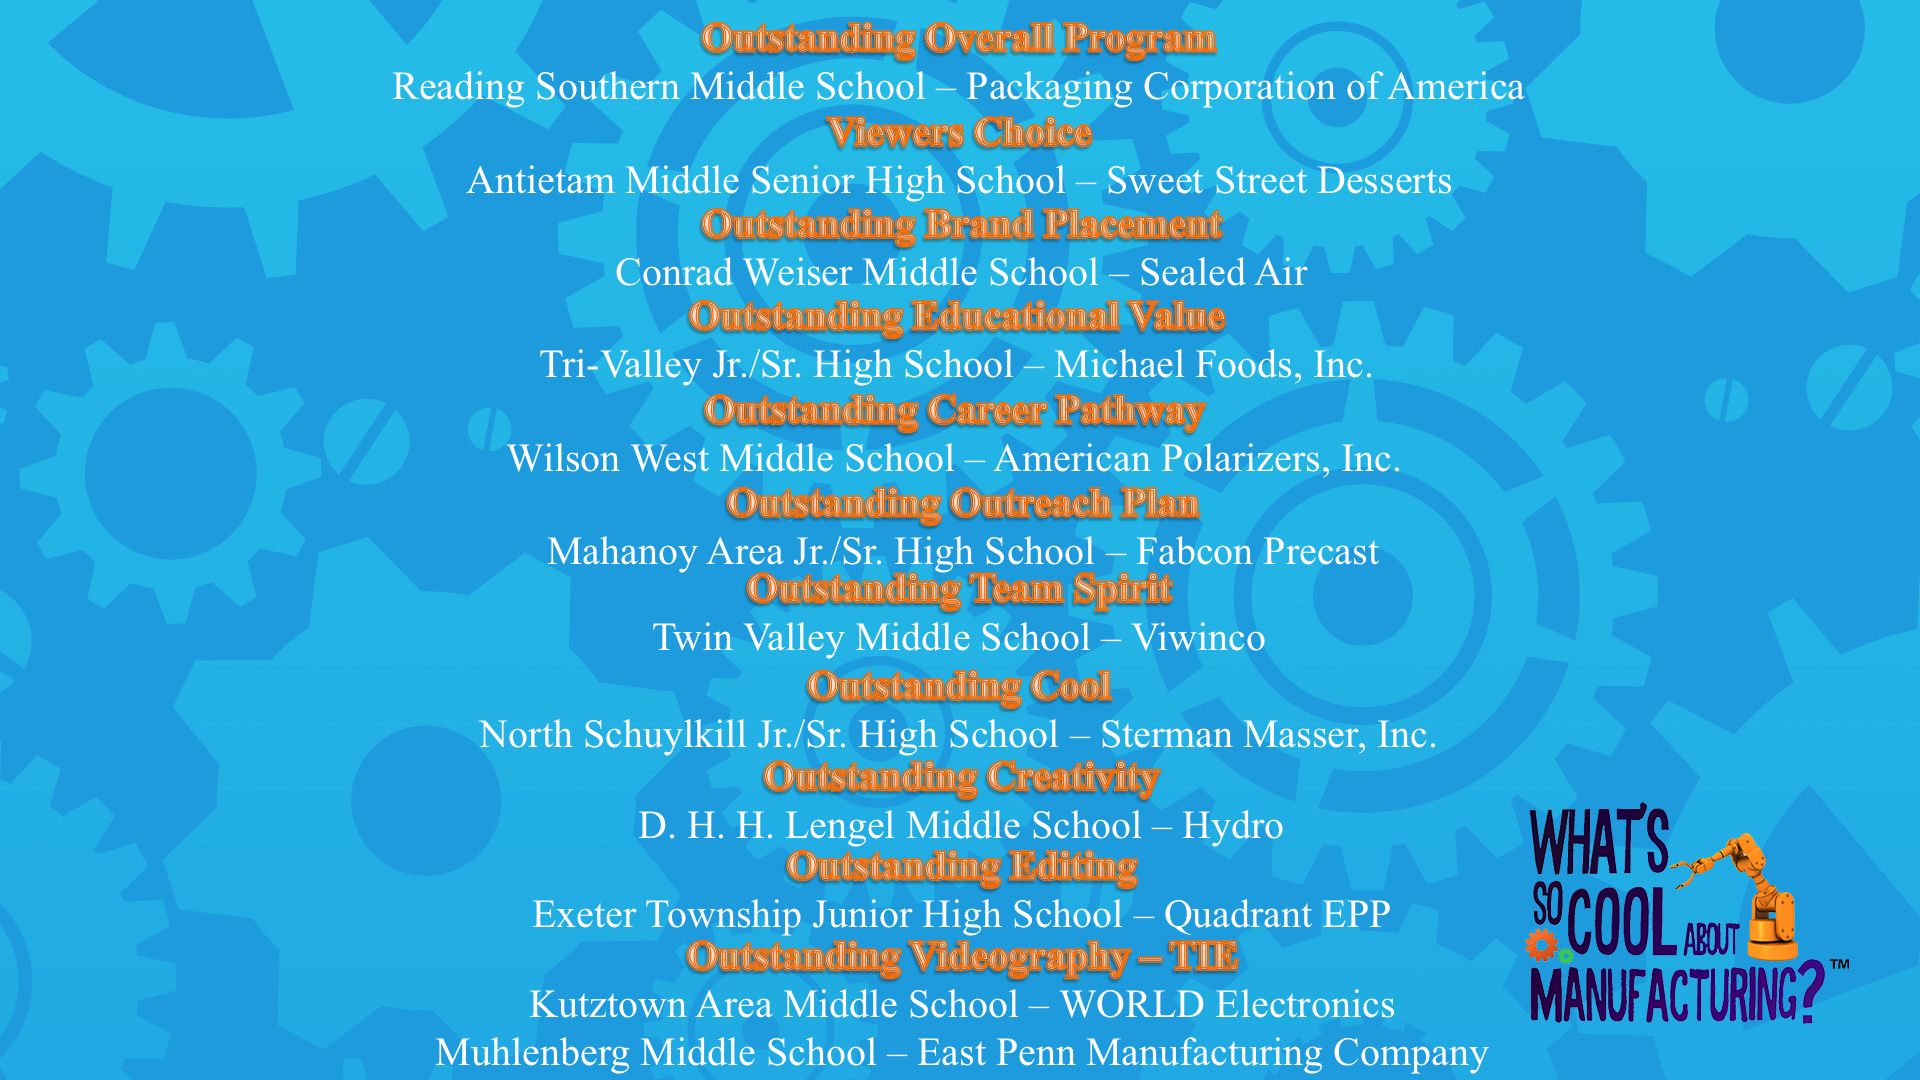 List of the winners of the "What's So Cool About Manufacturing?" Berks Schuylkill student video contest on March 5, 2019 in Reading, PA